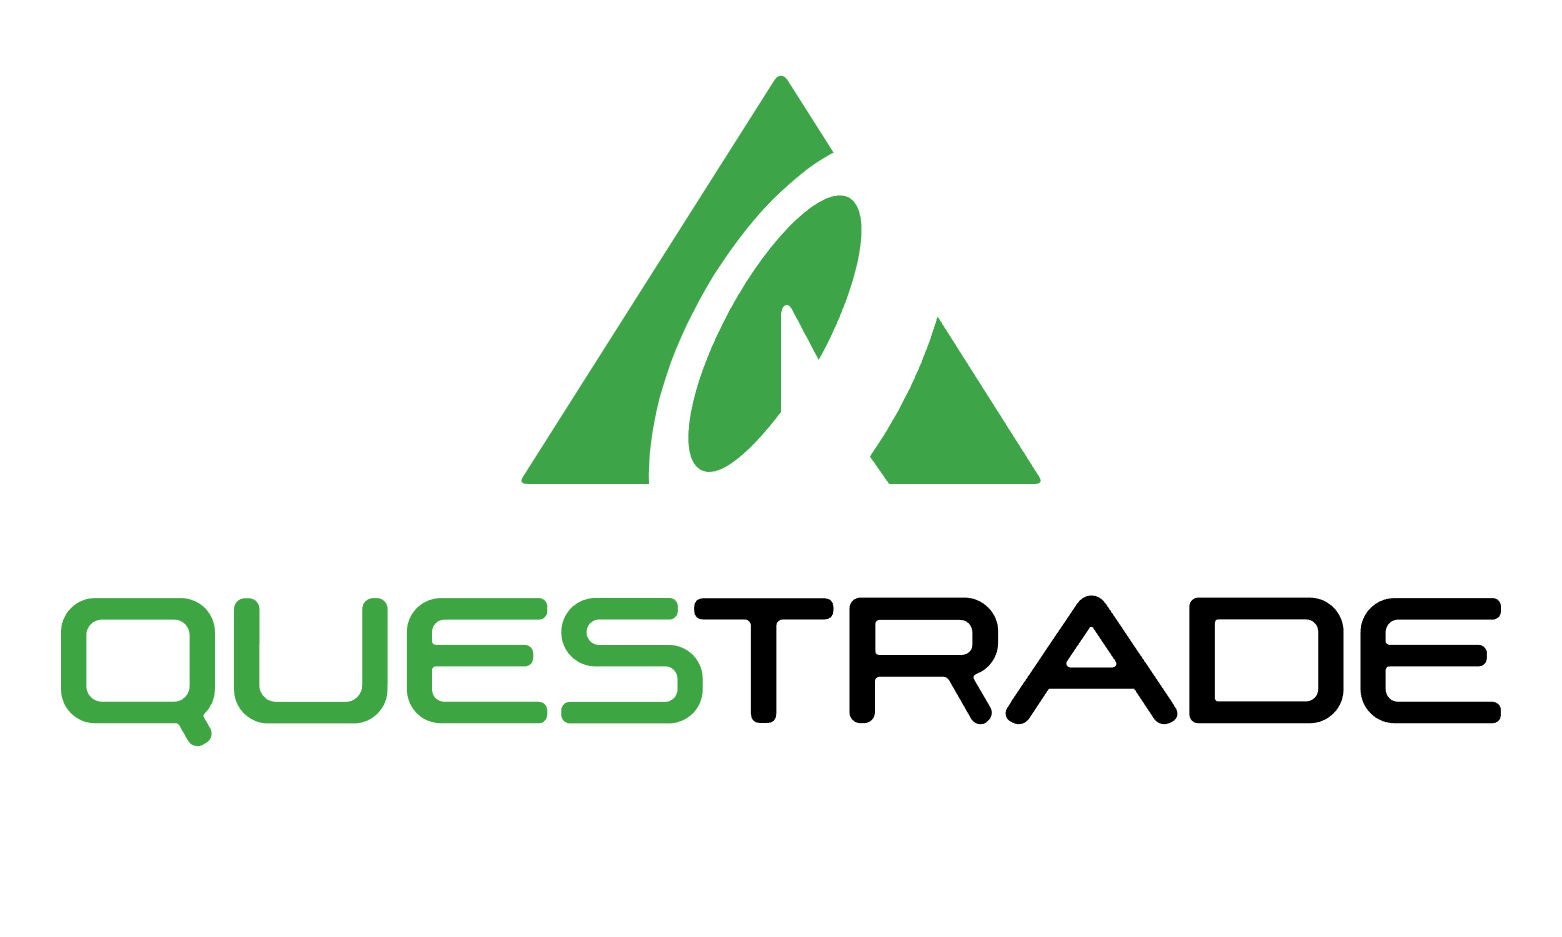 Questrade Investing review. Source: Questrade.